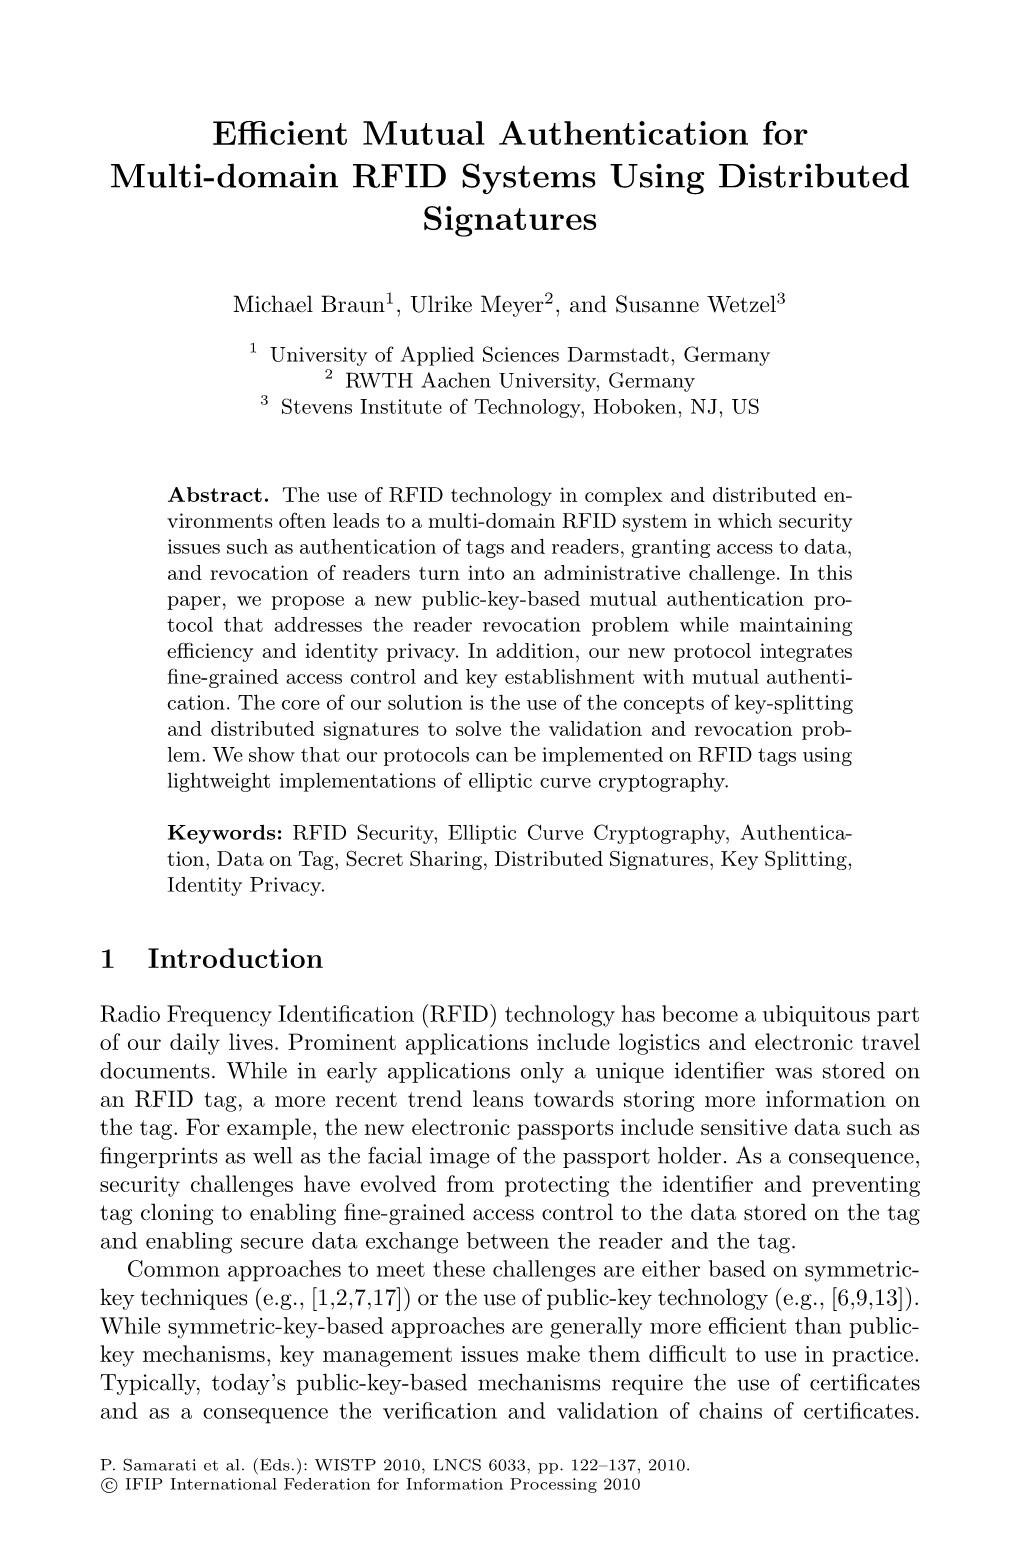 Efficient Mutual Authentication for Multi-Domain RFID Systems Using